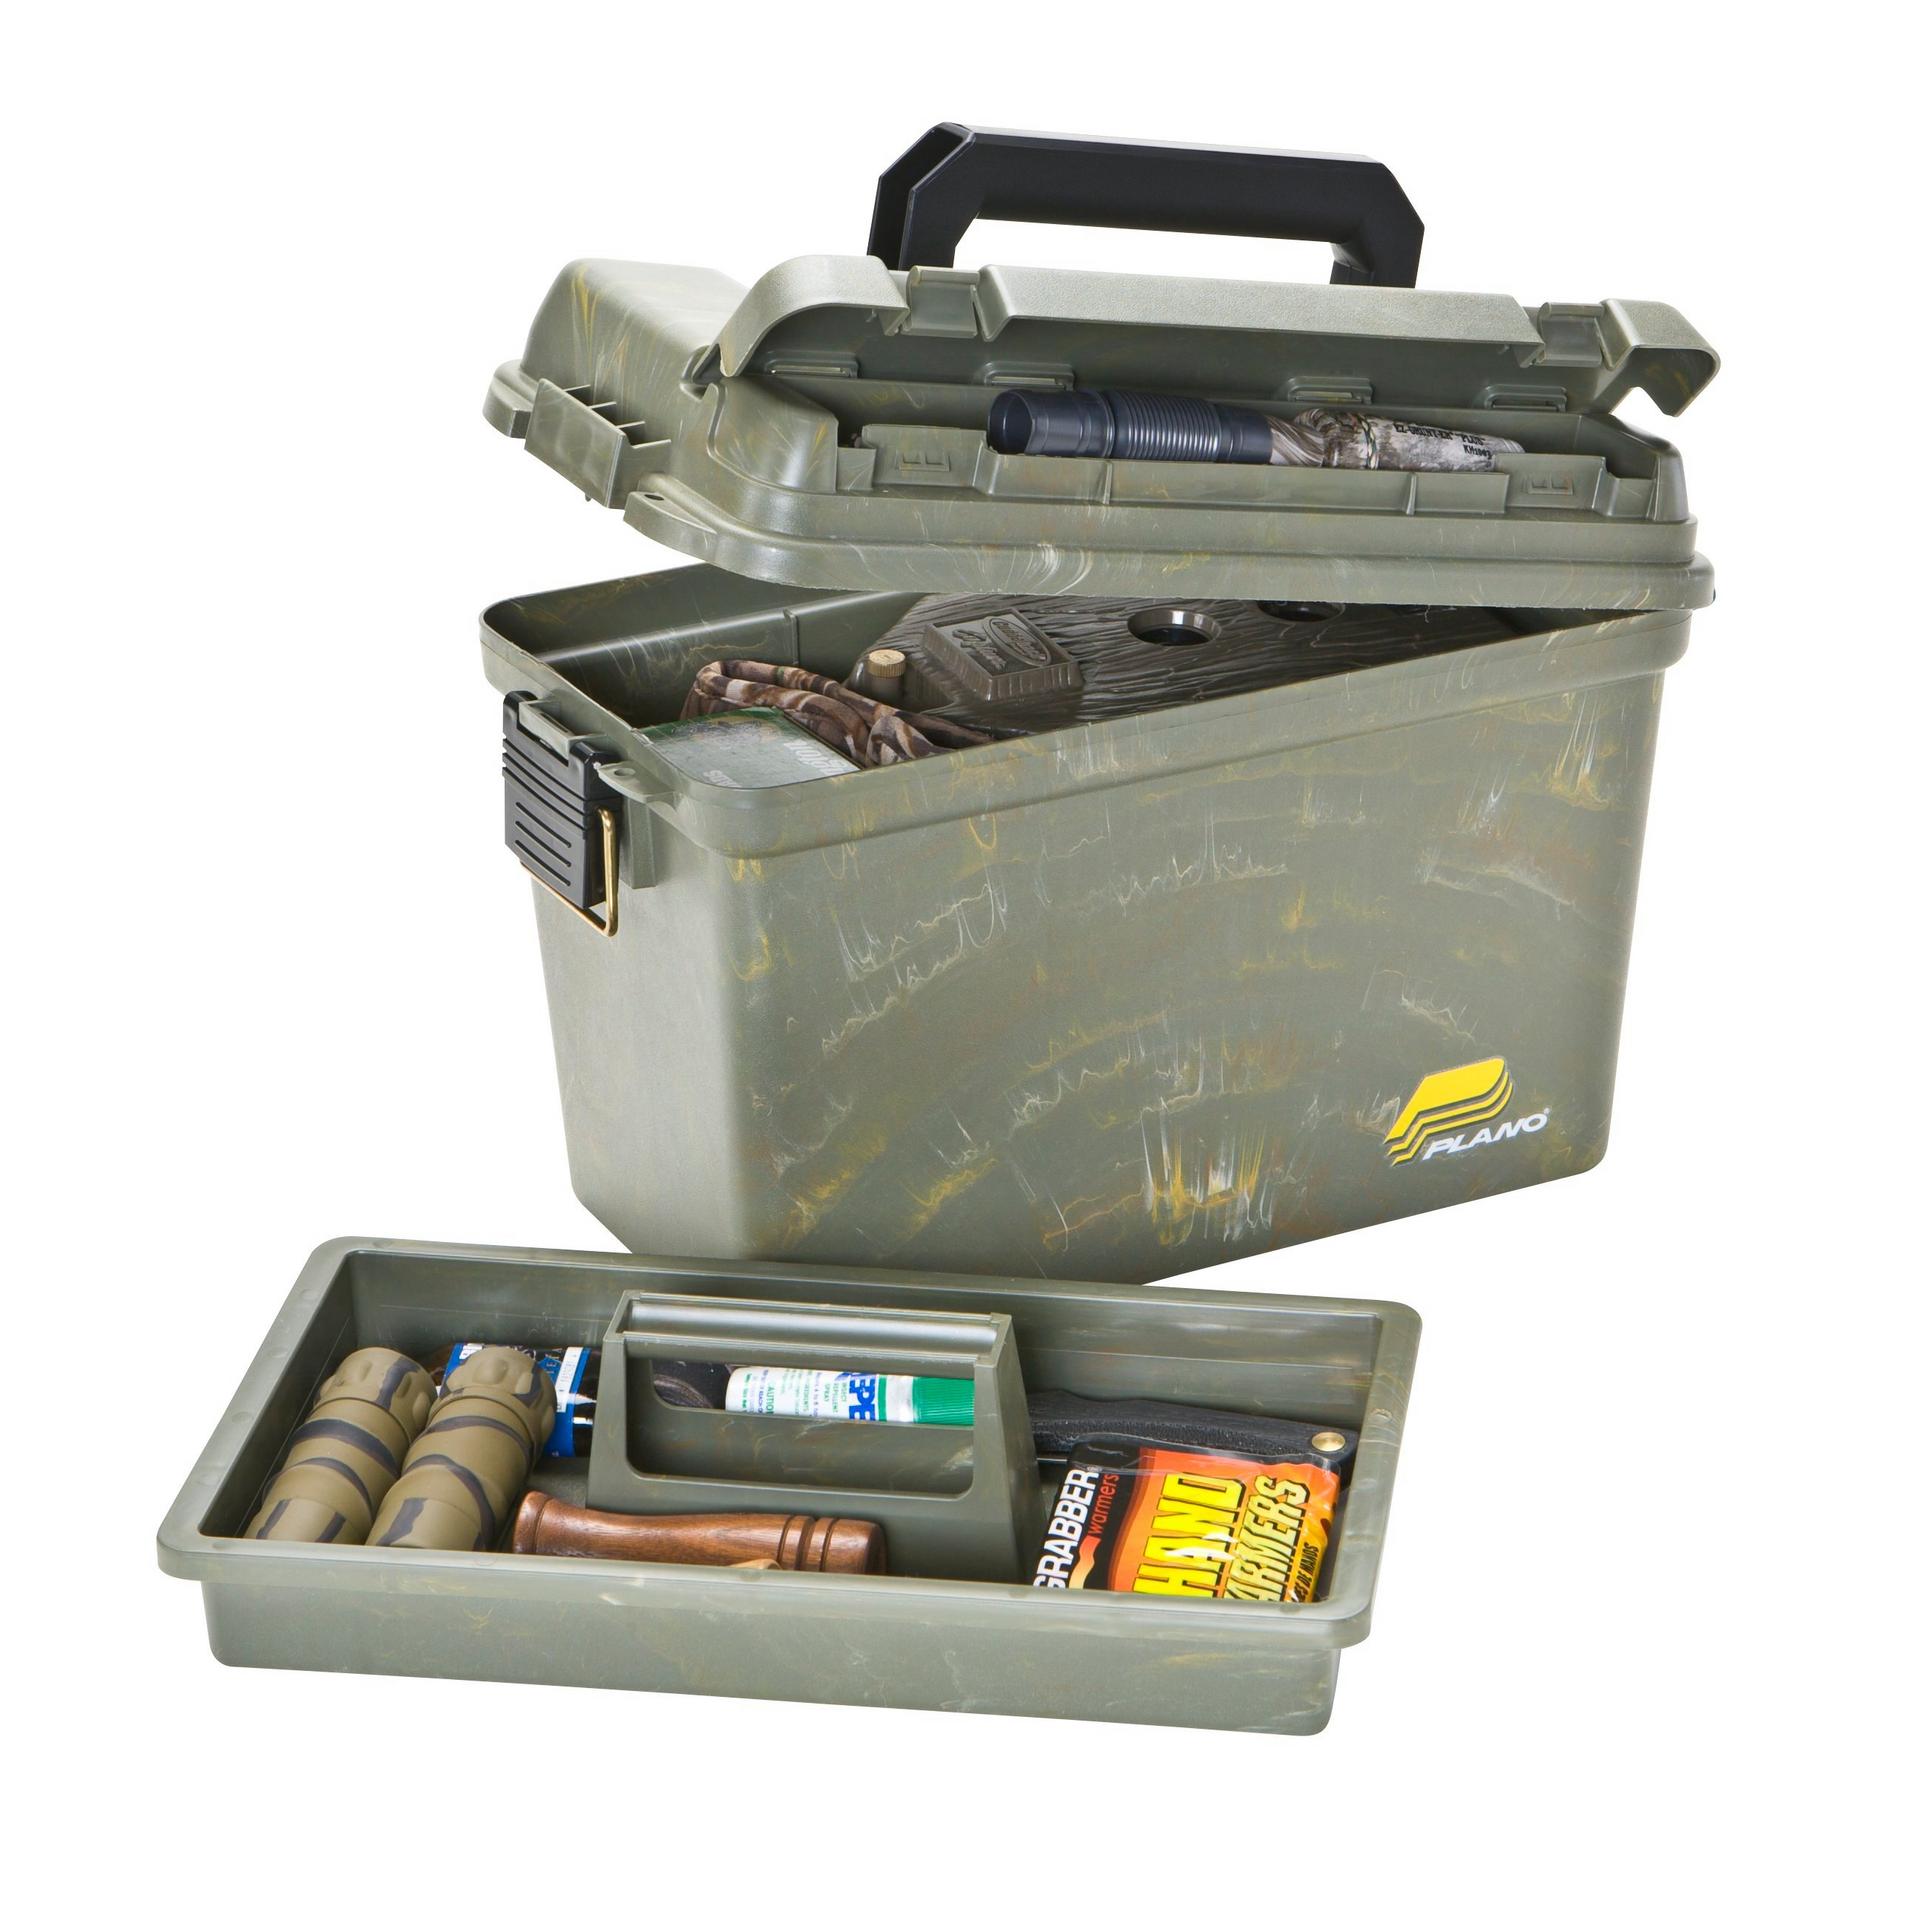 Element-Proof Field/Ammo Box with Tray | Plano®